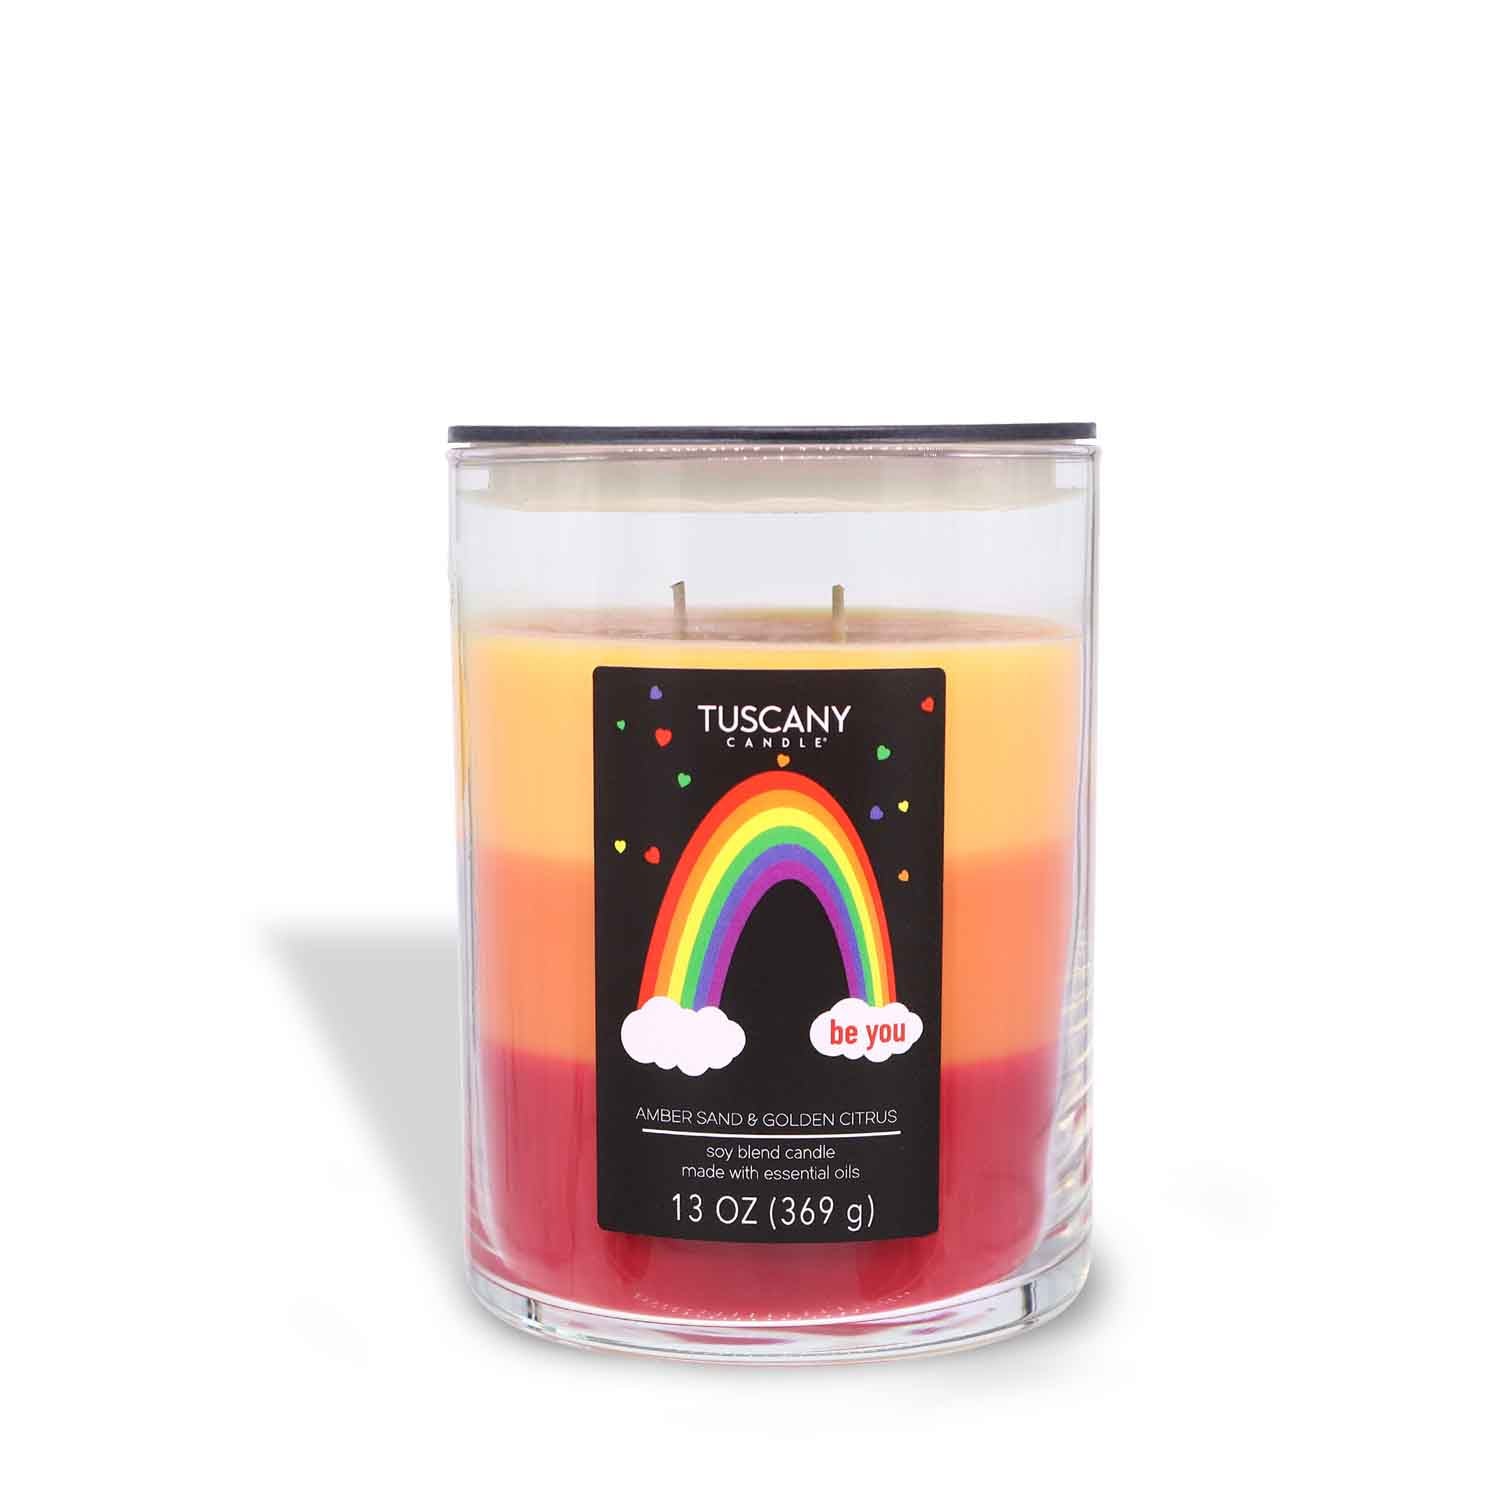 A Be You Scented Jar Candle (13 oz) from the Pride collection with a rainbow on it, made by Tuscany Candle® SEASONAL.